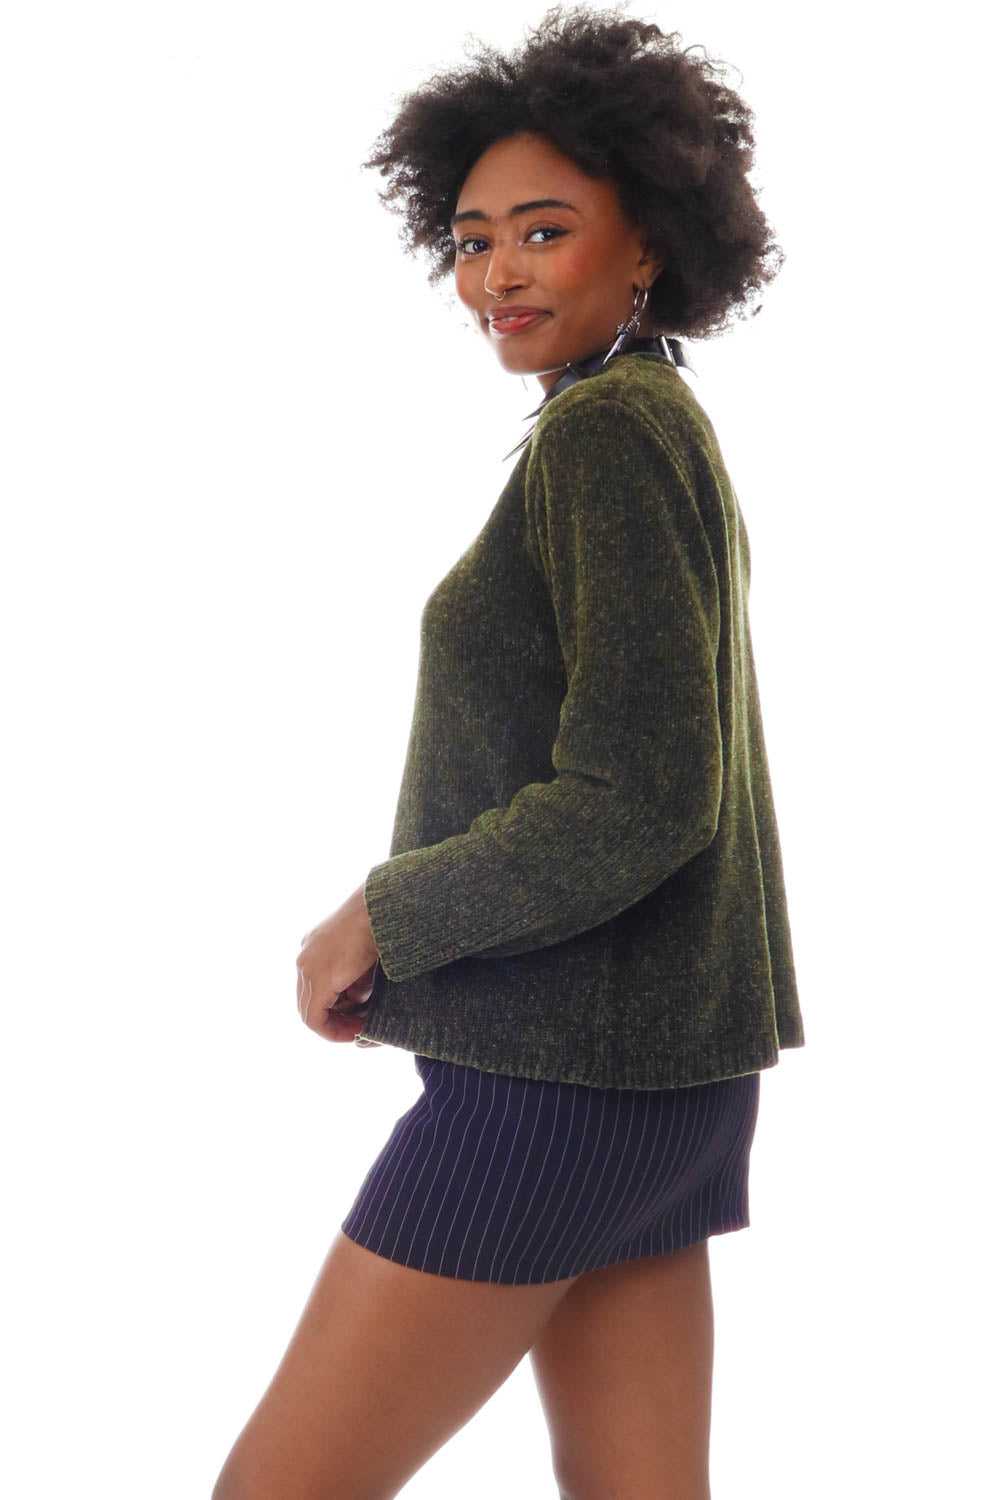 Vintage 90's Fuzzy Green Sweater - S/M - image 6